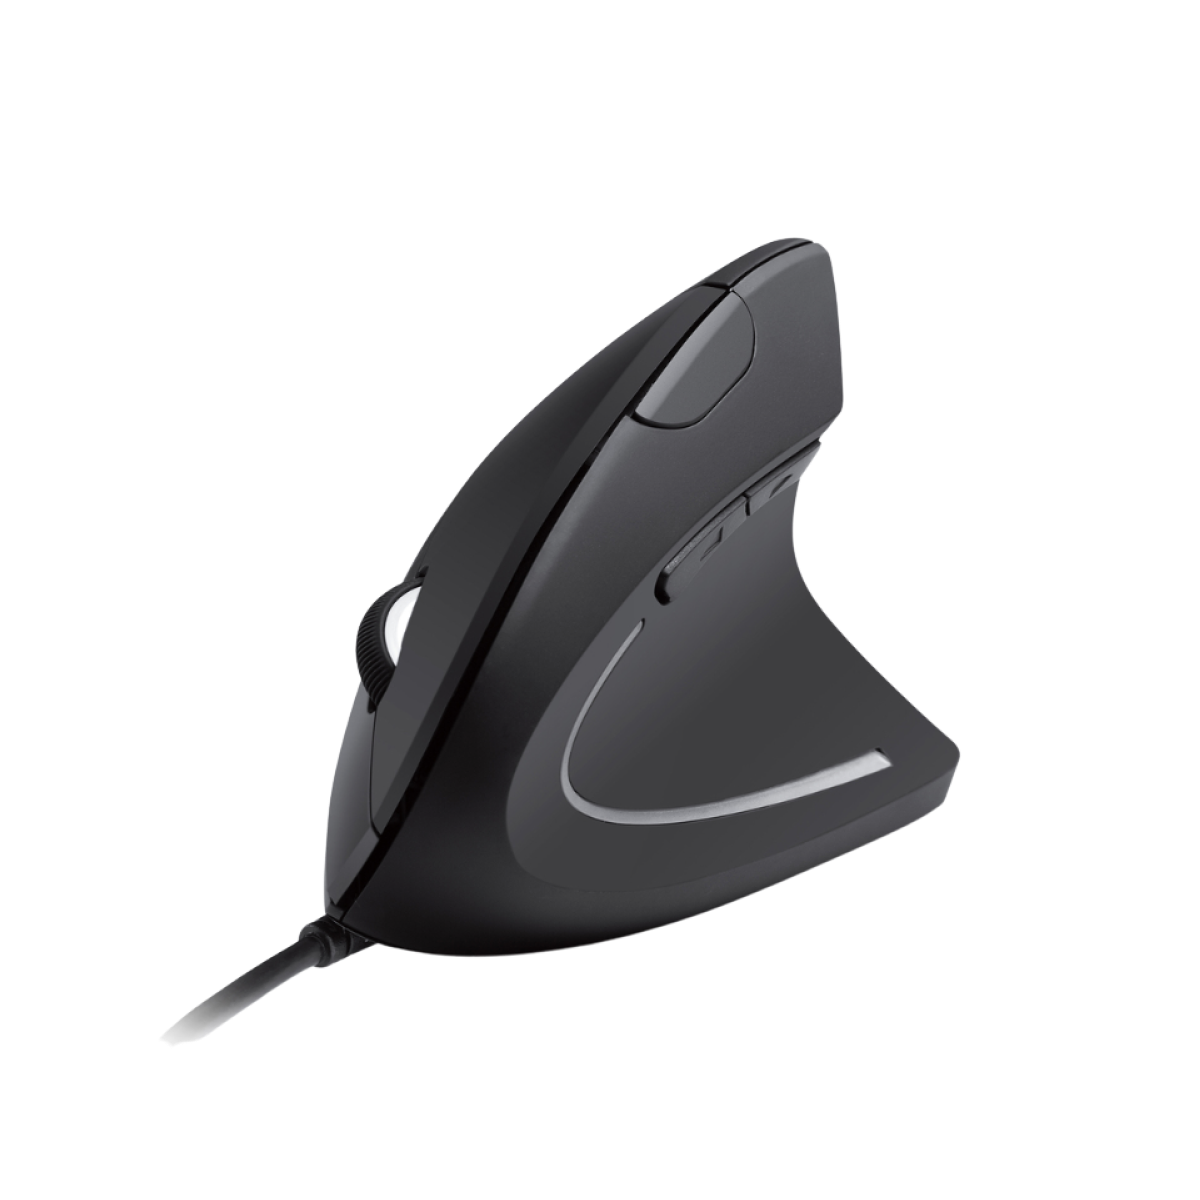 Anker's Wired Vertical Ergonomic Mouse